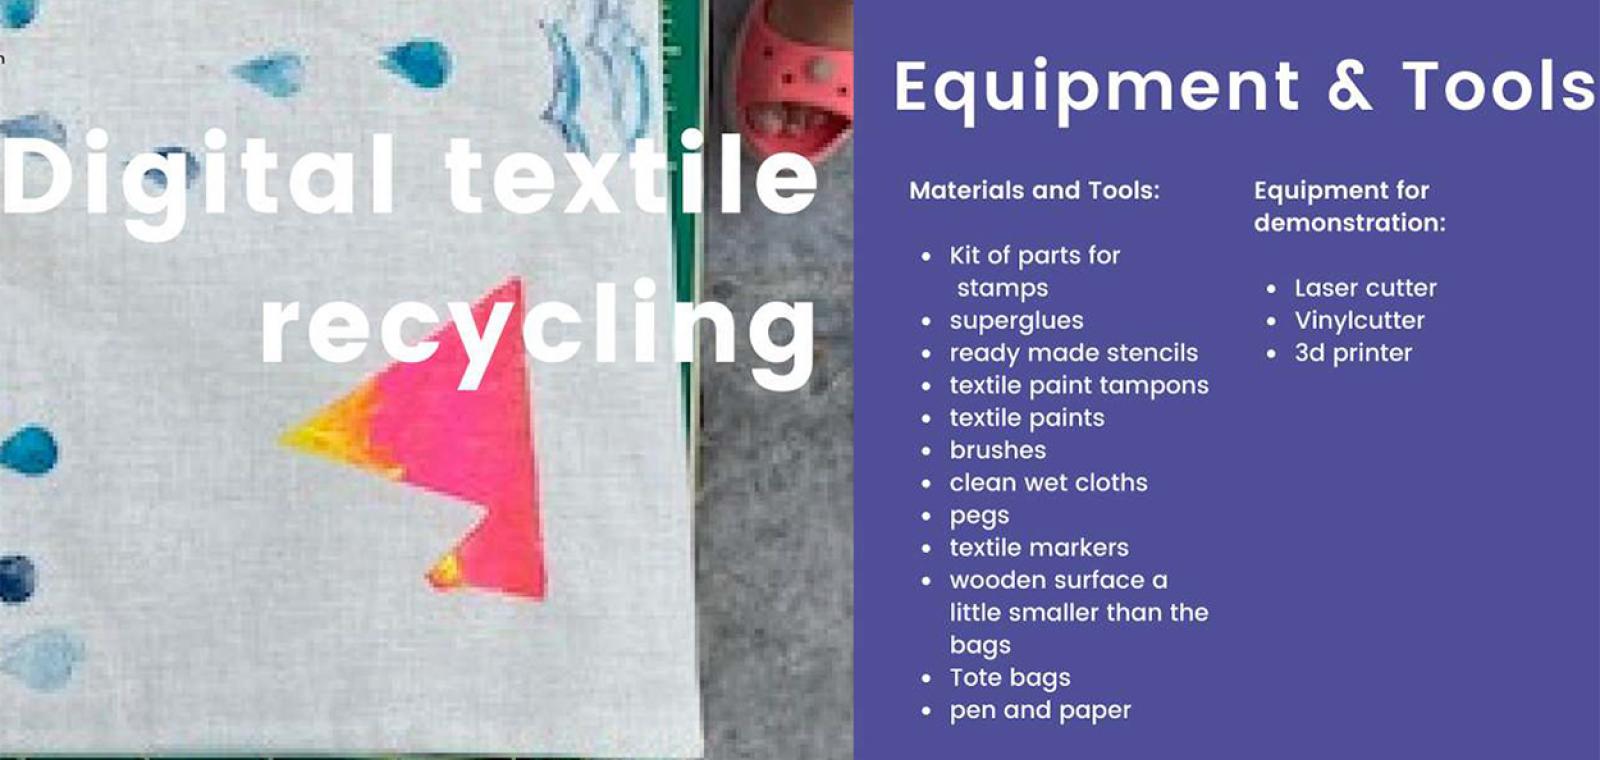 Digital Textile recycling